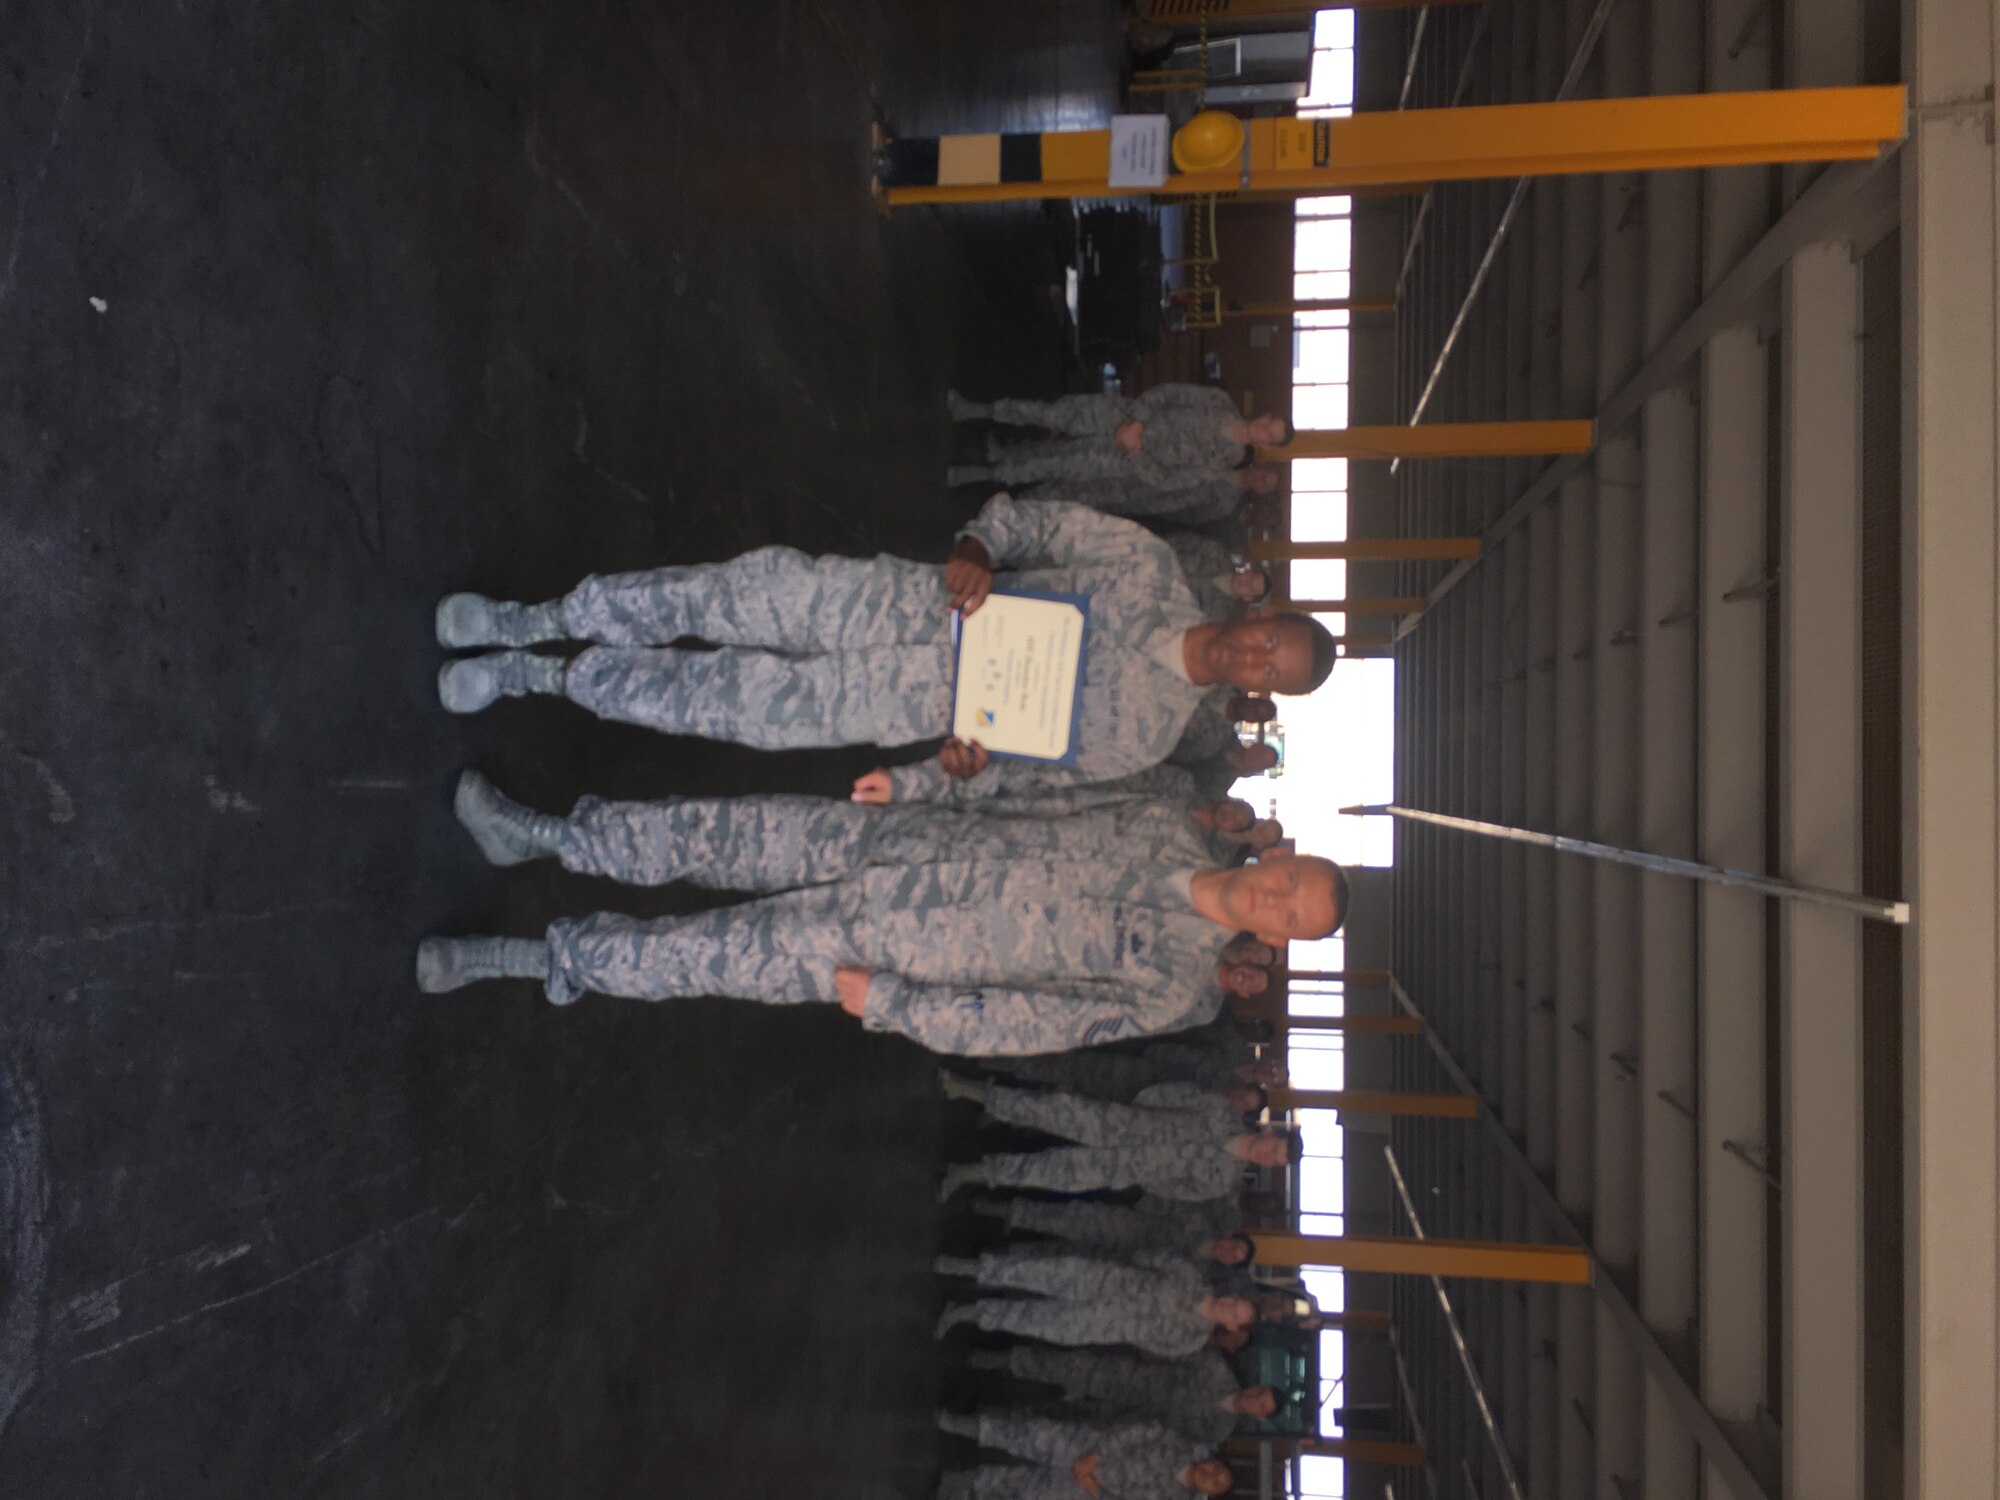 Airman 1st Class Brandon Butts, a 635th Materiel Maintenance Support Squadron mobility readiness spare package apprentice, receives the Top III Airman award from Master Sgt. William Wallick, the 54th Aircraft Maintenance Squadron first sergeant, Aug. 2, 2017, at Holloman Air Force Base, N.M. Butts helped identify 400 expired items, coordinated with equipment custodians for local disposal, and established replacement items worth $12K. He assisted with the transfer of 40,000 assets between equipment custodians for war plans additive plans requirement. Additionally, Butts completed three college-level exam program tests earning 12 credit hours toward his Community College of the Air Force degree. (Courtesy photo)